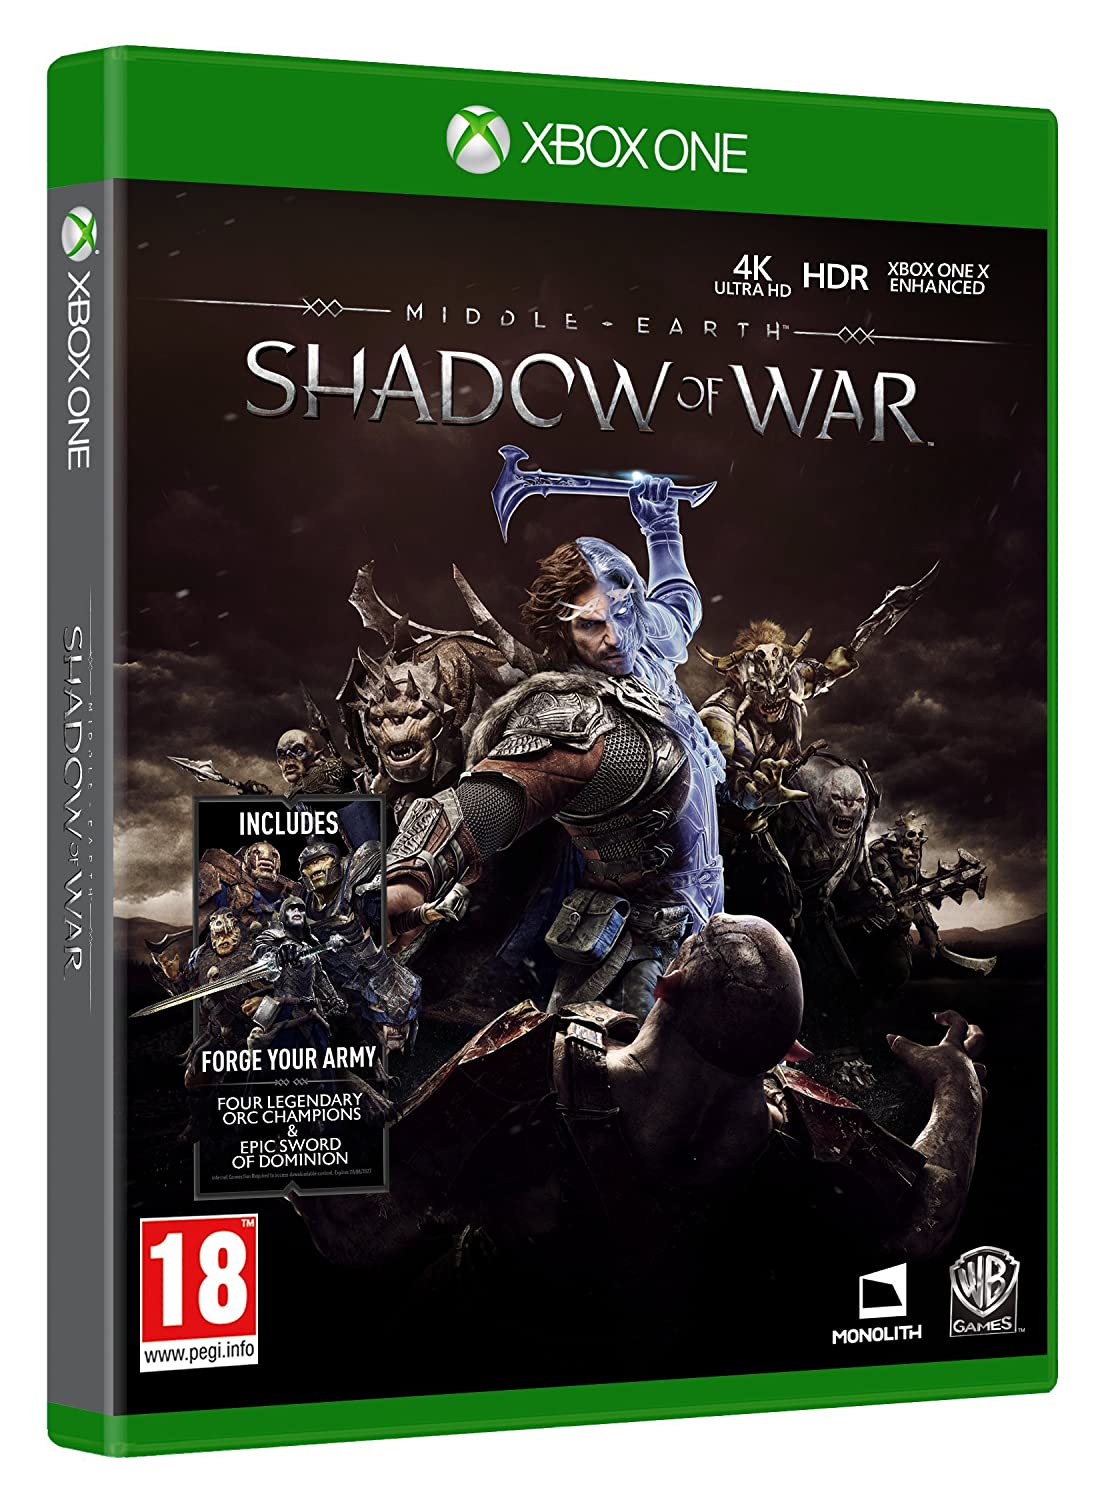 Middle-earth: Shadow of War (EUR)